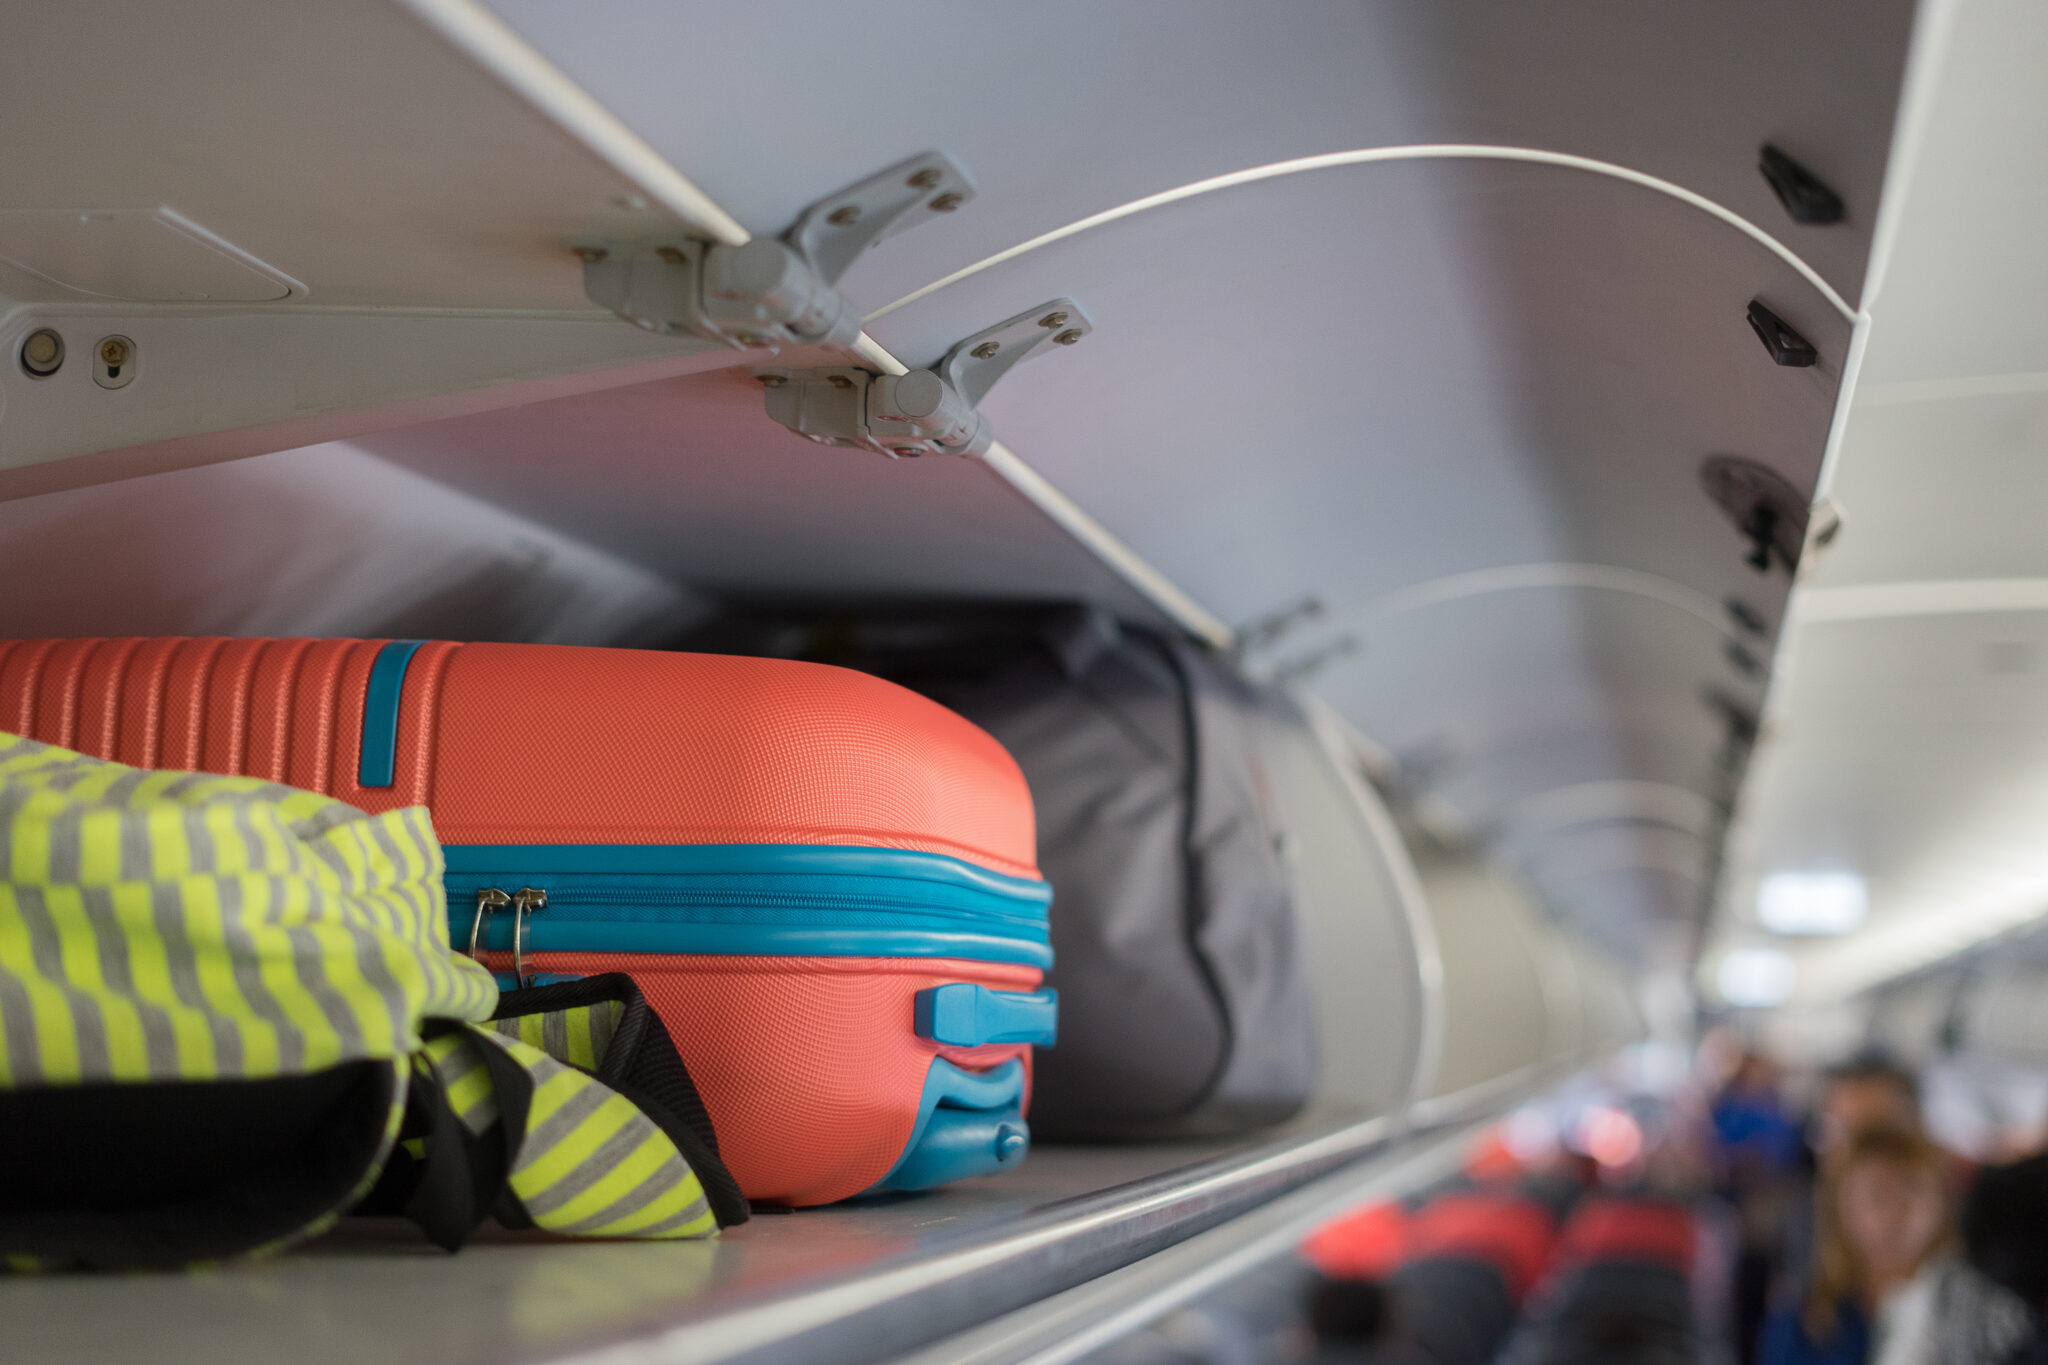 spirit-airlines-carry-on-and-checked-baggage-policies-million-mile-secrets